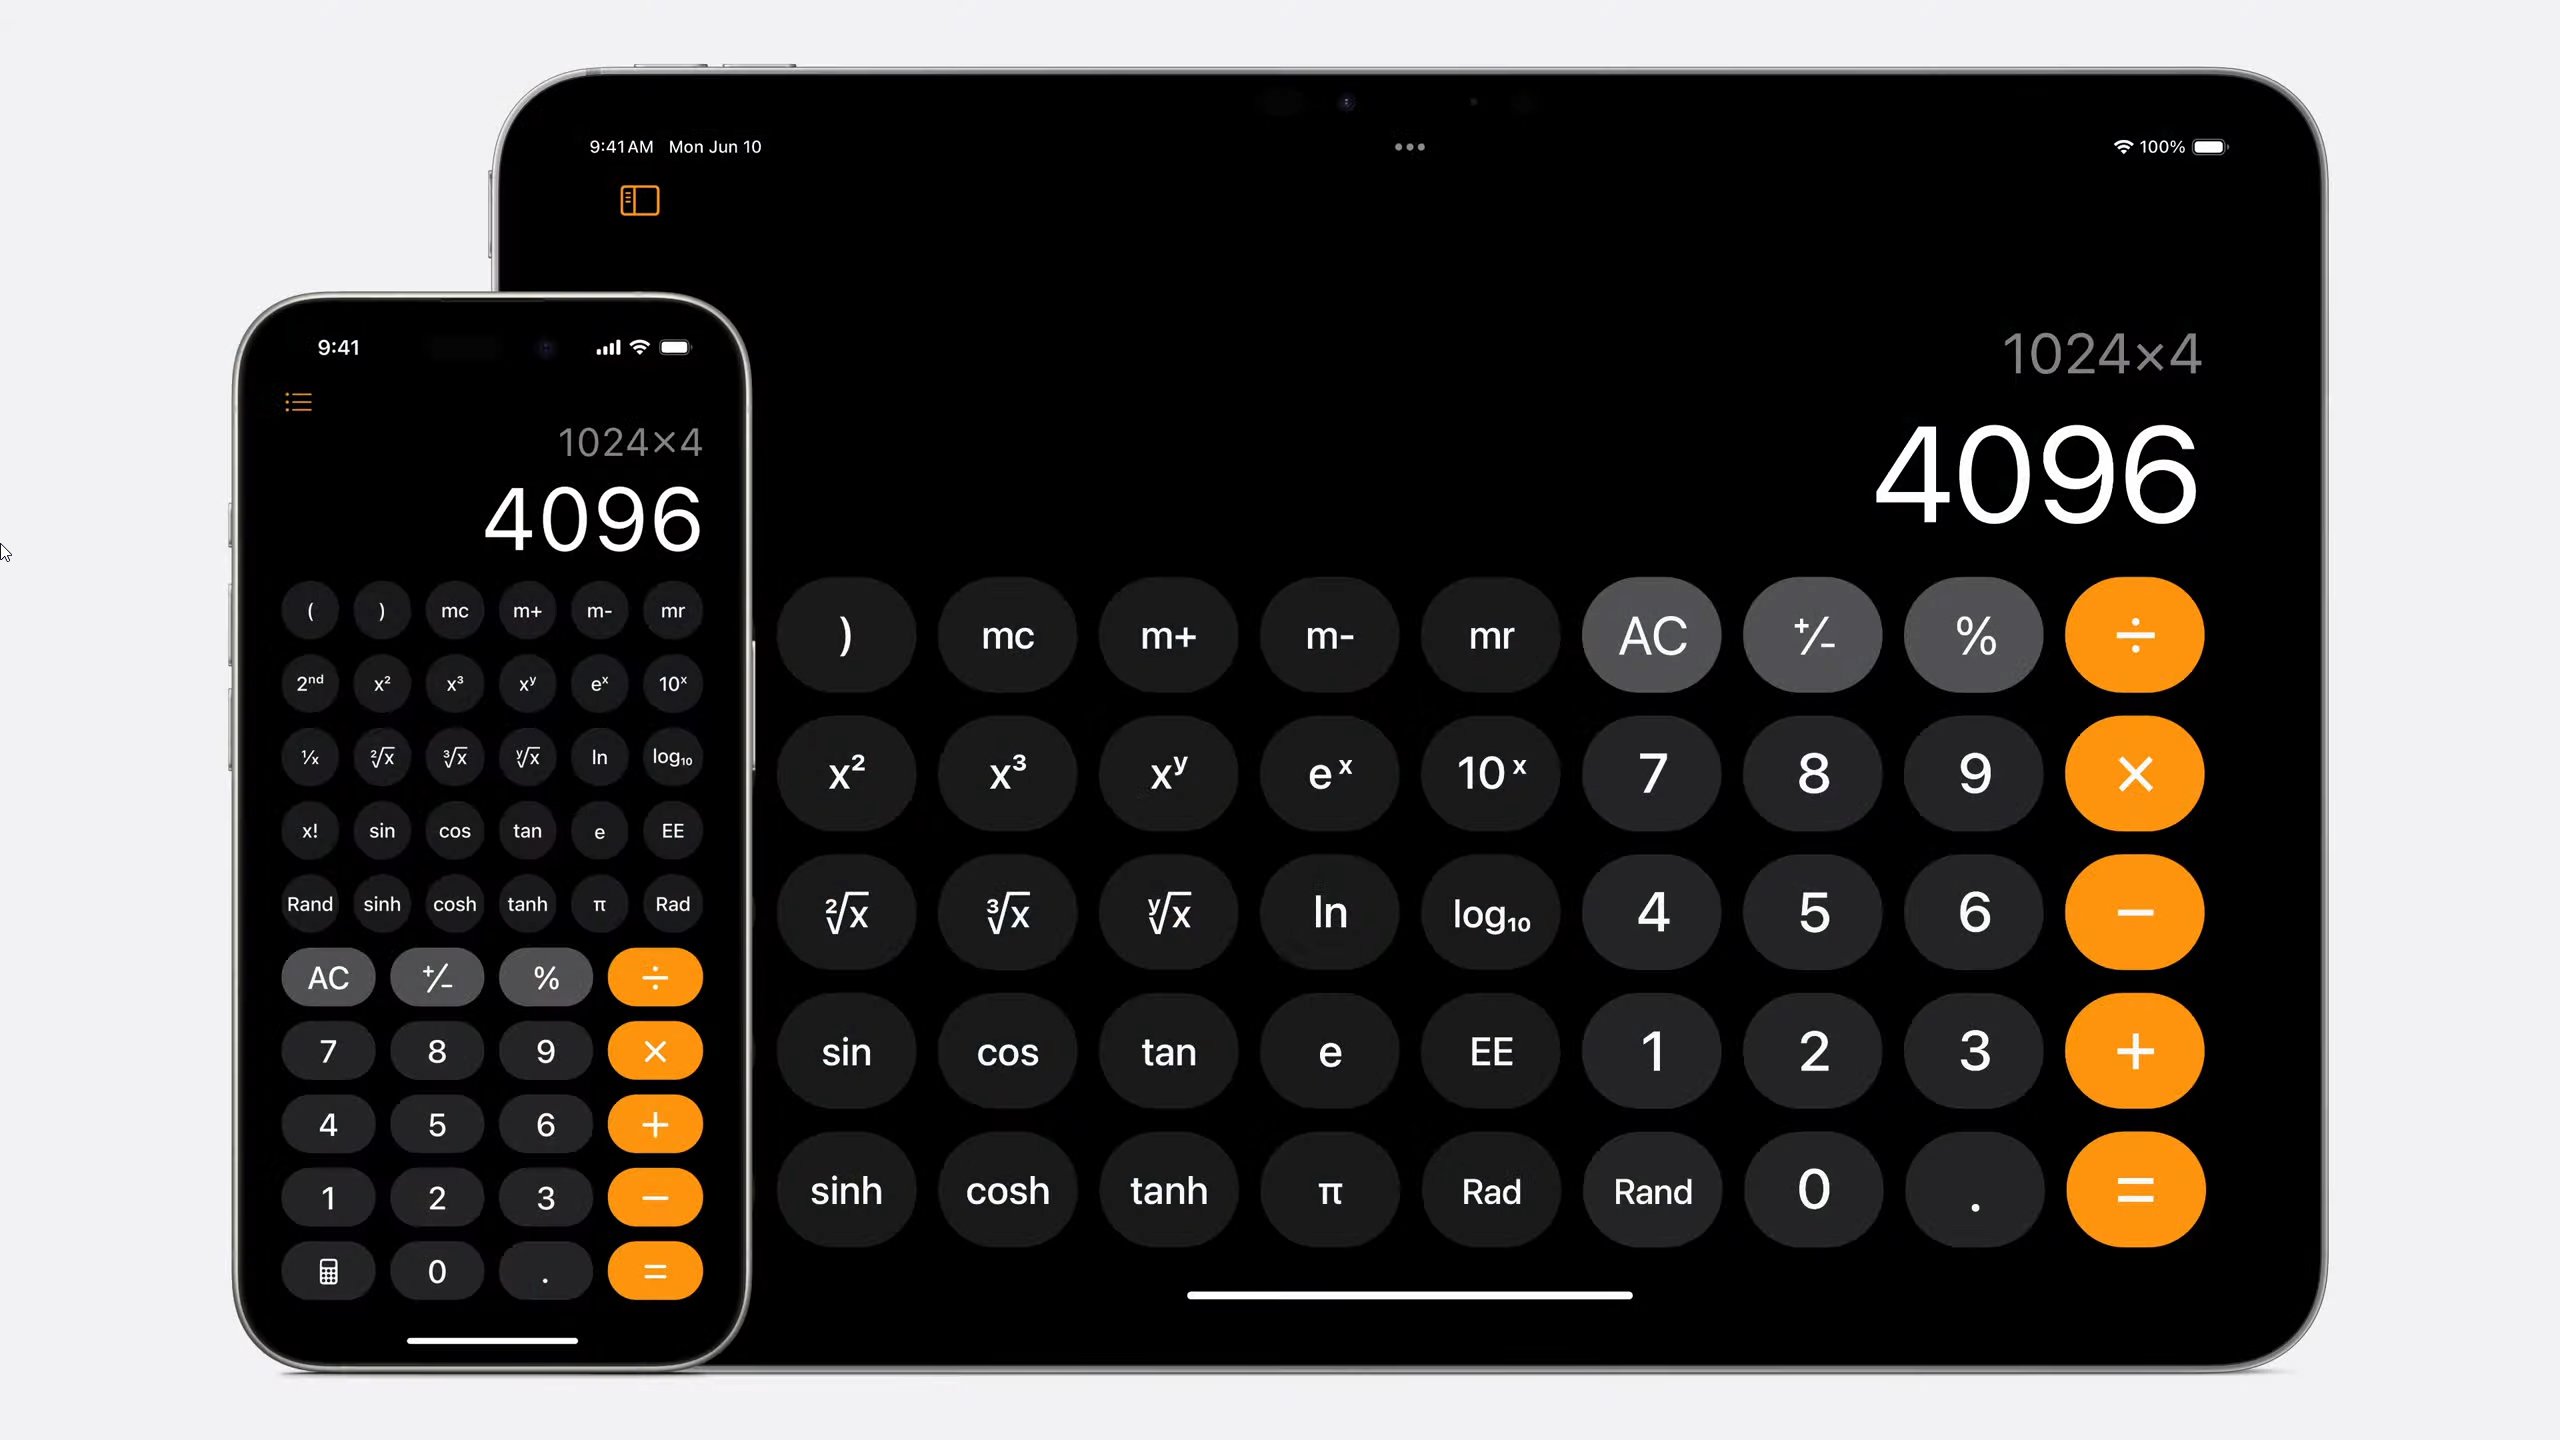 Other iOS 18 features include a new calculator